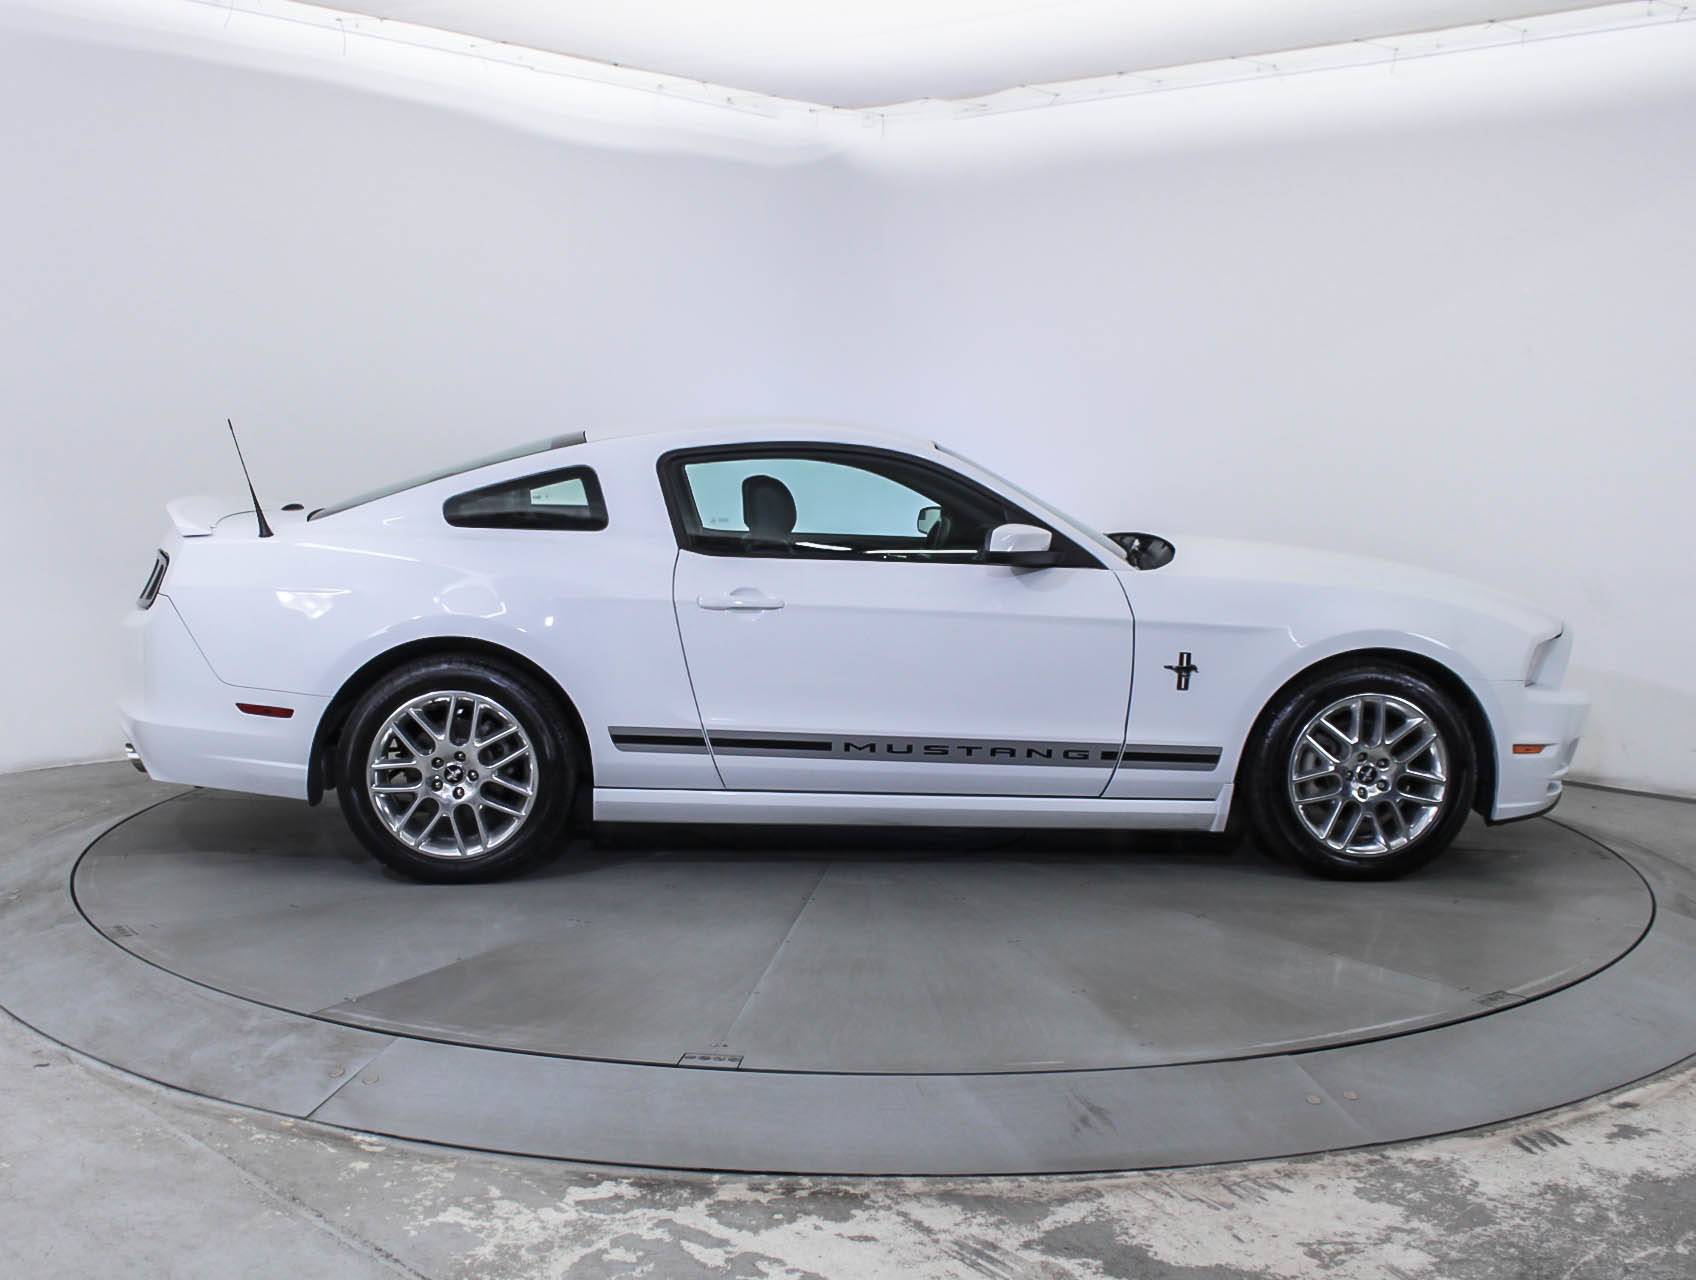 Florida Fine Cars - Used FORD MUSTANG 2014 HOLLYWOOD Premium